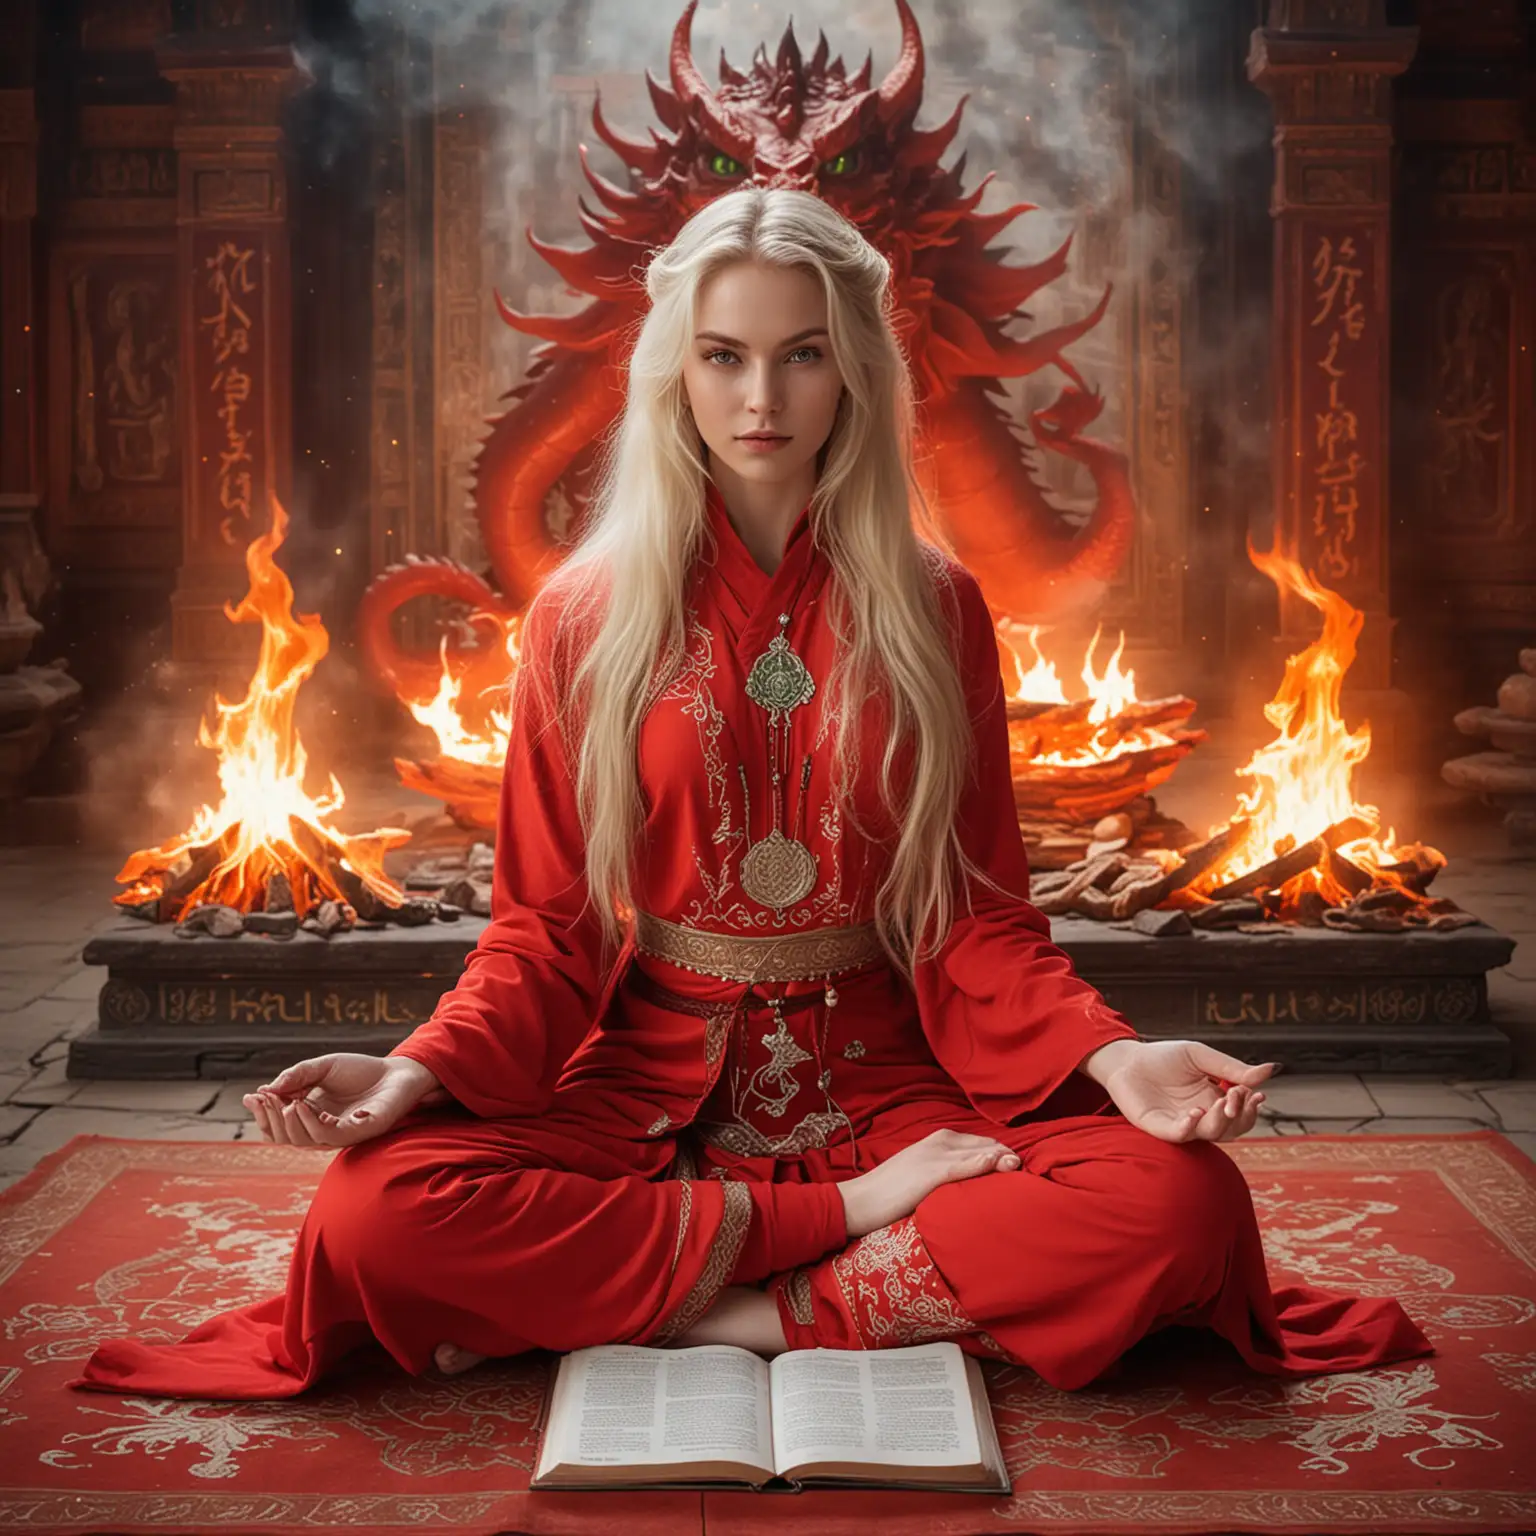 Blonde Goddess Sorceress in Lotus Position with Dragons and Fire